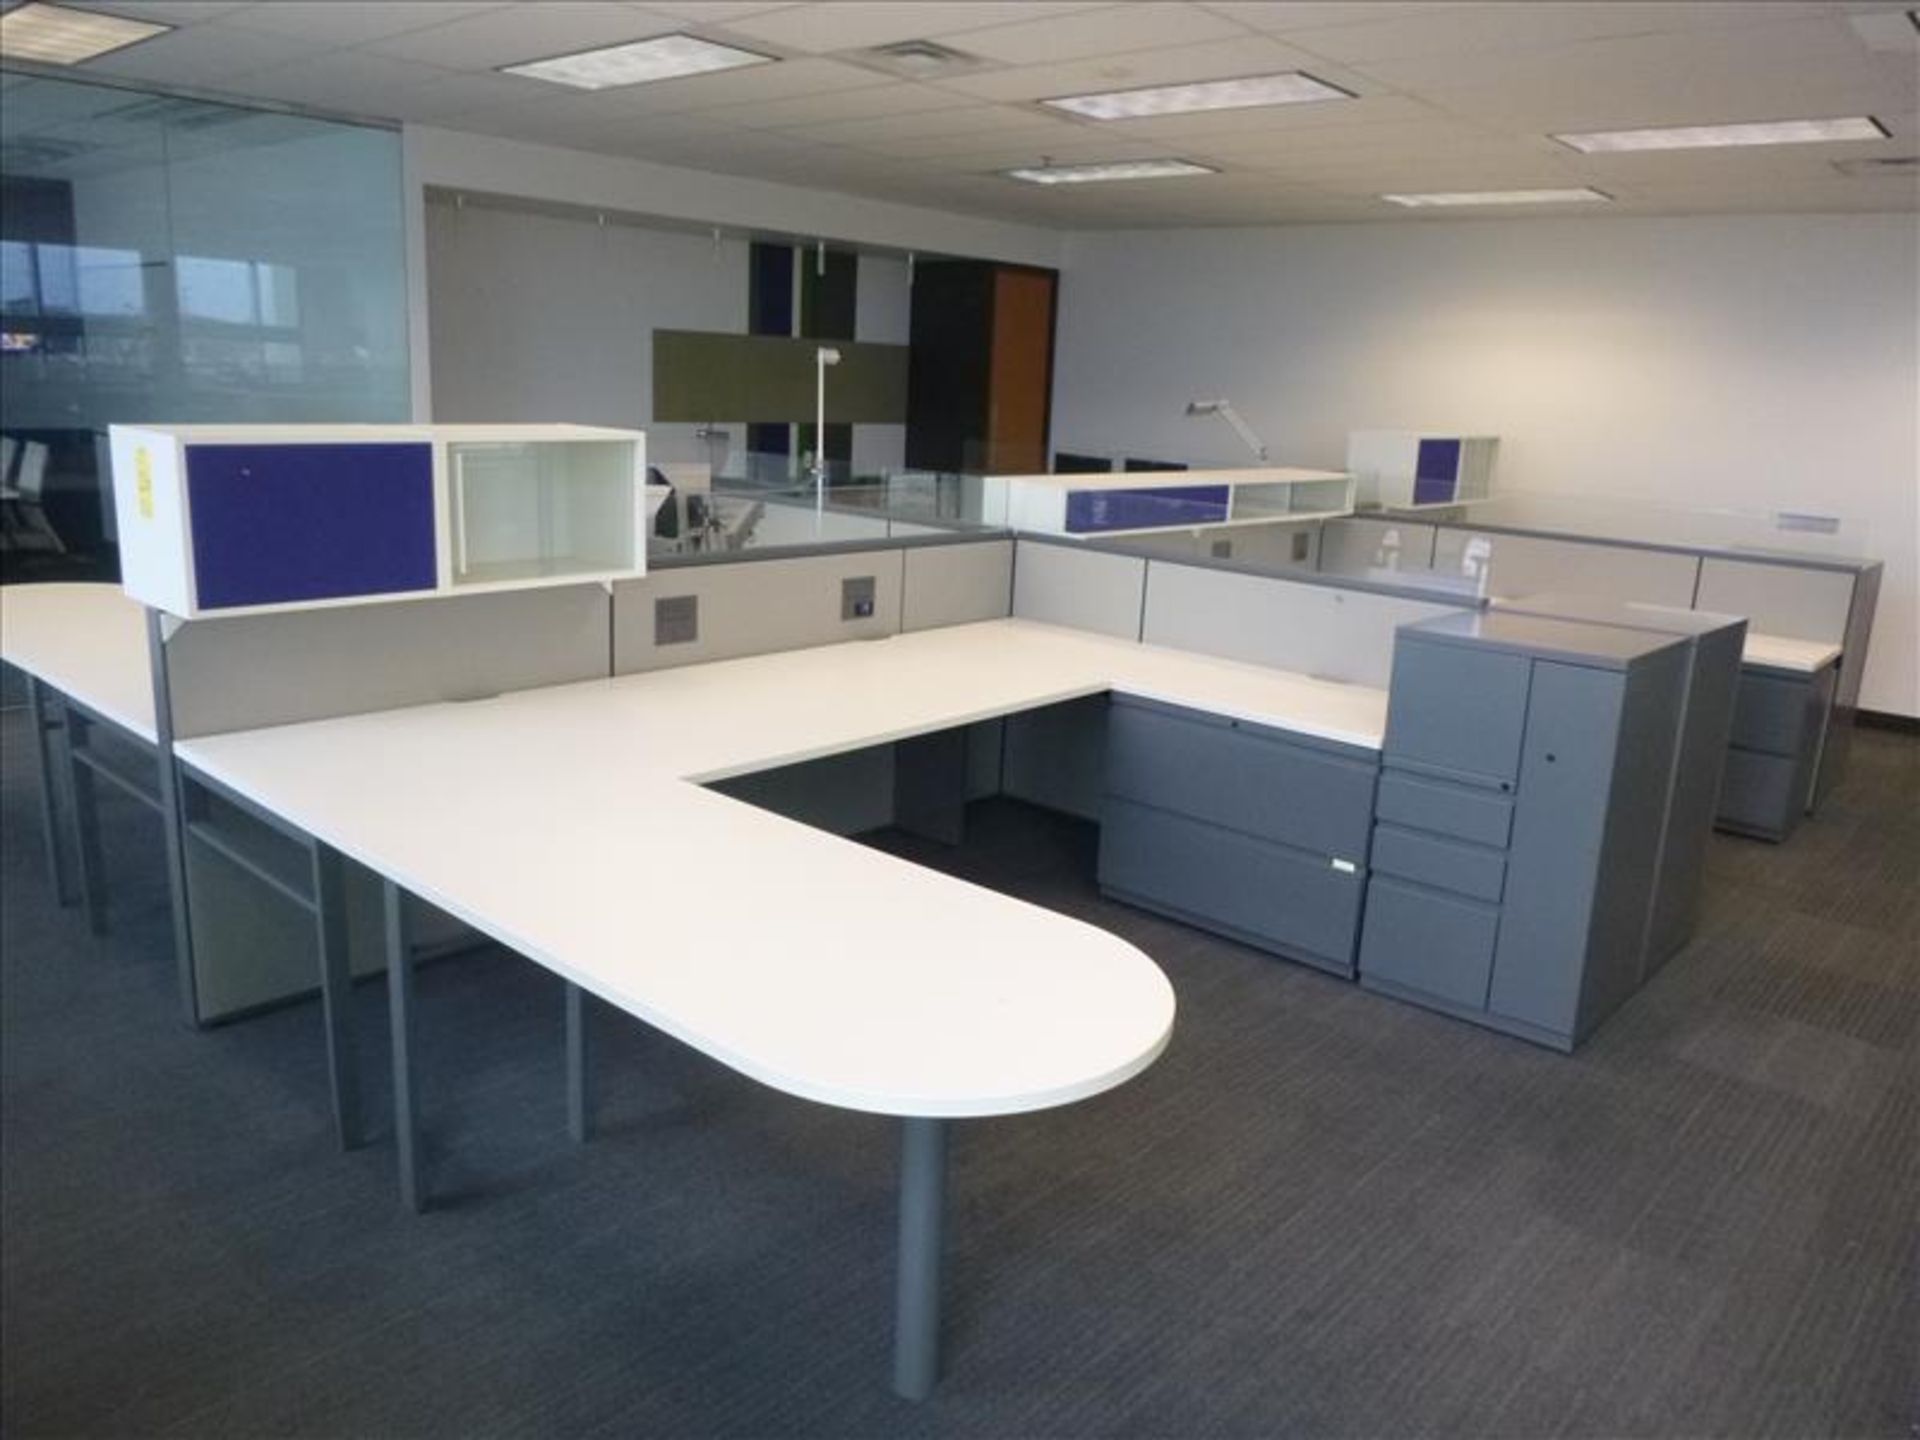 (6) Haworth cubicle workstations, approx. 16' x 24.5' footprint (excl. contents and office